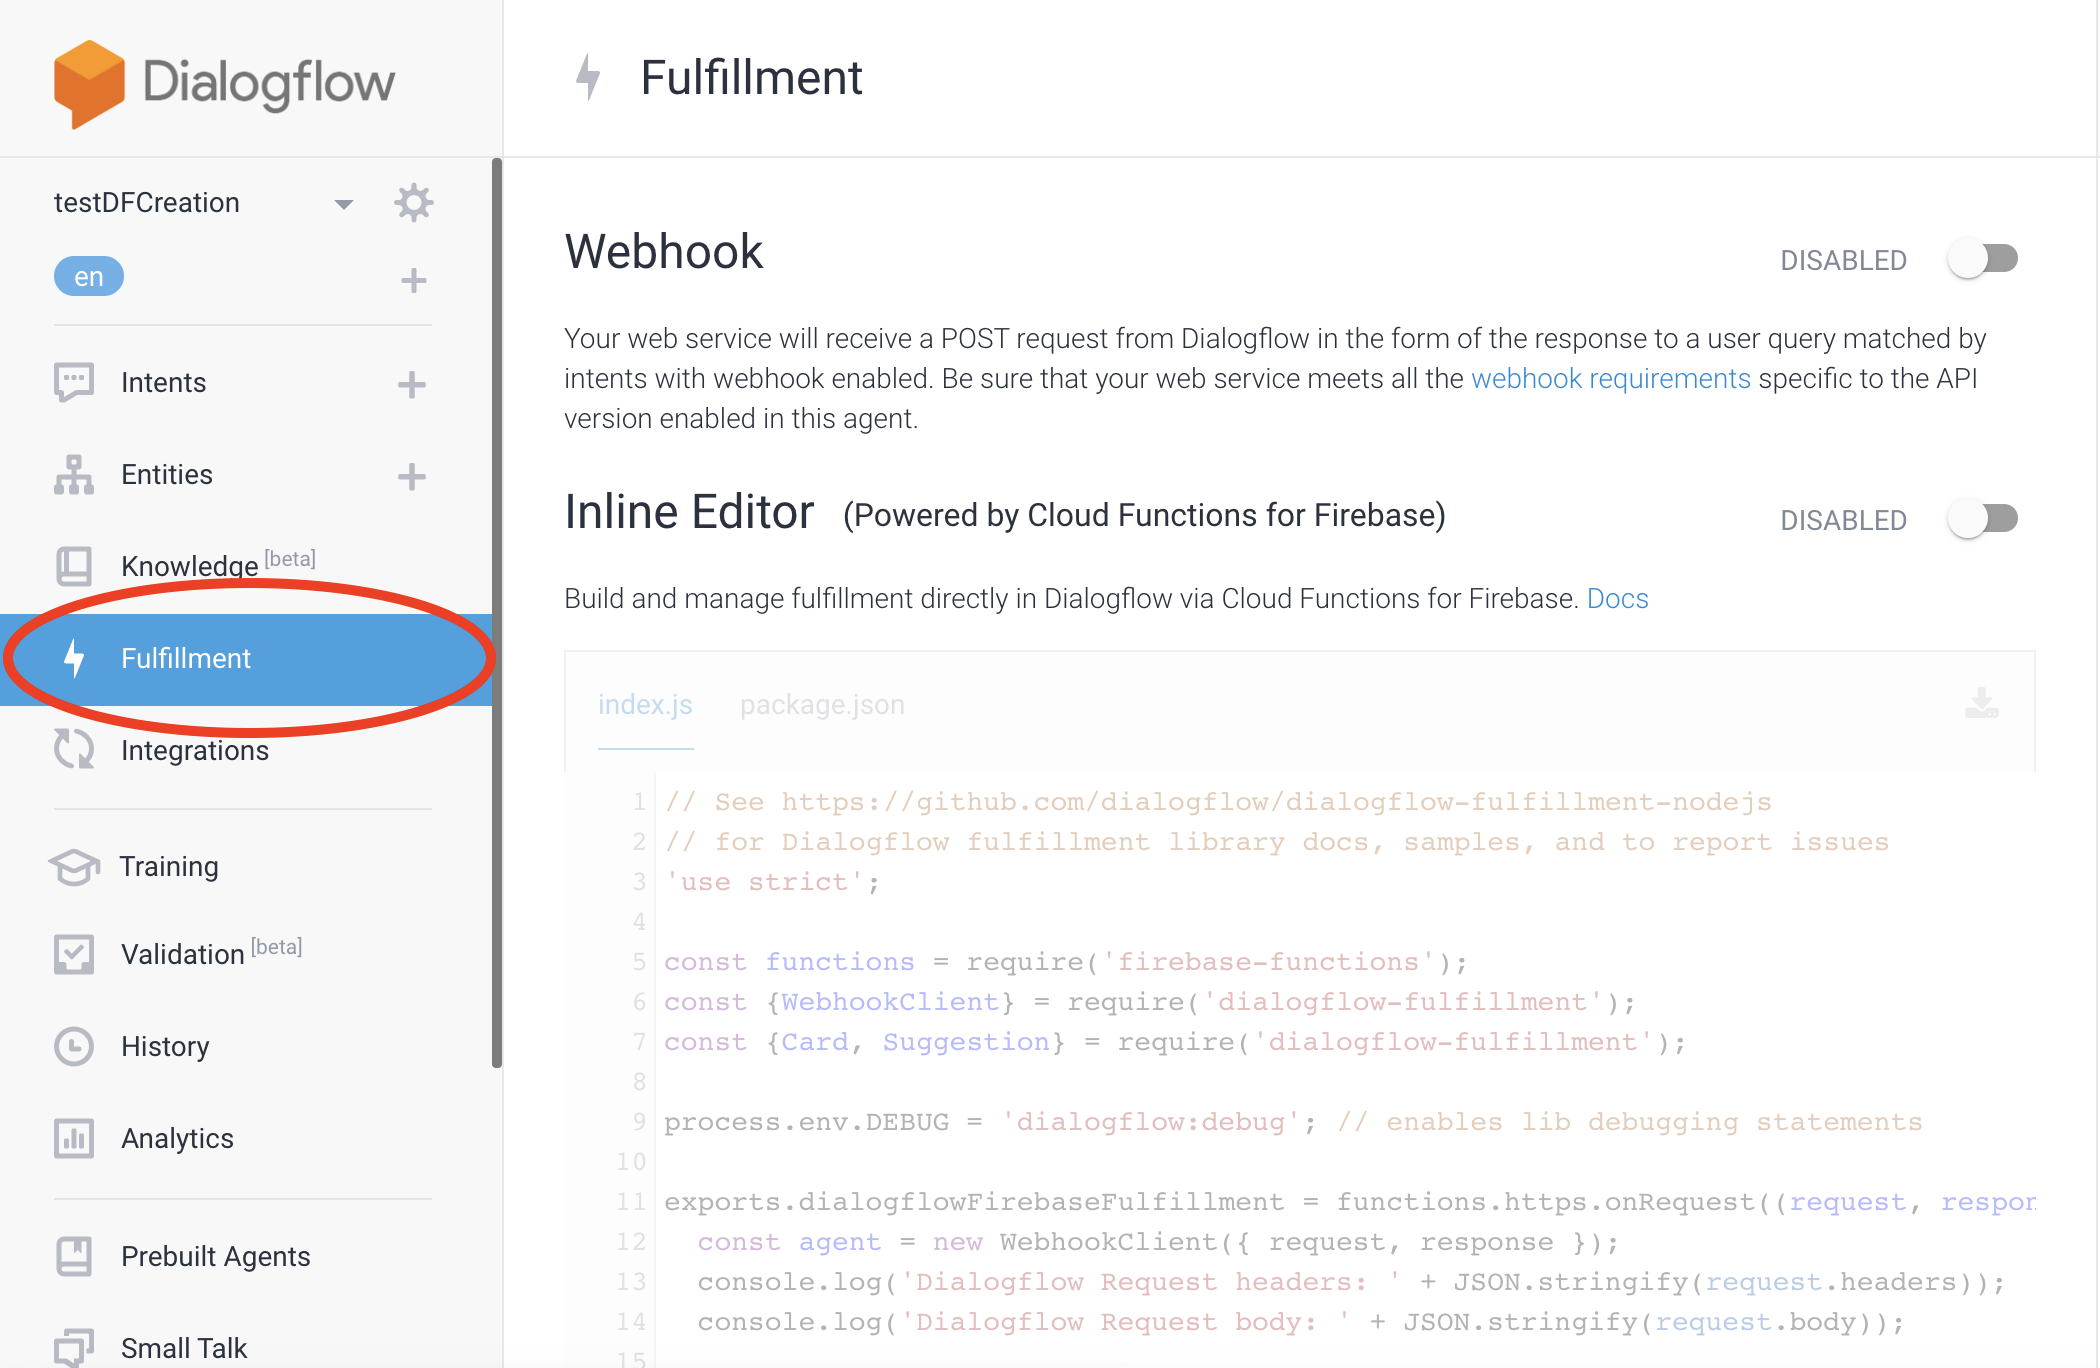 Here you’ll see two headers, both disabled: “Webhook” and “Inline Editor”. The “Webhook” option allows you to write code in any language you’d like that runs anywhere you’d like (on your own server, [on App Engine](https://cloud.google.com/appengine?utm_source=google&utm_medium=cpc&utm_campaign=na-US-all-en-dr-bkws-all-all-trial-p-dr-1008076&utm_content=text-ad-none-any-DEV_c-CRE_122585960767-ADGP_Hybrid+%7C+AW+SEM+%7C+SKWS+%7C+US+%7C+en+%7C+Multi+~+App+Engine-KWID_43700017651054481-aud-382823310150:kwd-7742176743&utm_term=KW_app%20engine-ST_app+engine&gclid=Cj0KCQiAv8PyBRDMARIsAFo4wK1BStahnJhtc5ReW8qA3AyYdckEGv7annzzSLzWEDdkLtaDEinvbs0aAlQ5EALw_wcB), with [Firebase Cloud Functions](https://firebase.google.com/docs/functions), etc.). You’ll just need to write code that can accept POST requests from Dialogflow and can respond to [spec](https://cloud.google.com/dialogflow/docs/fulfillment-overview).